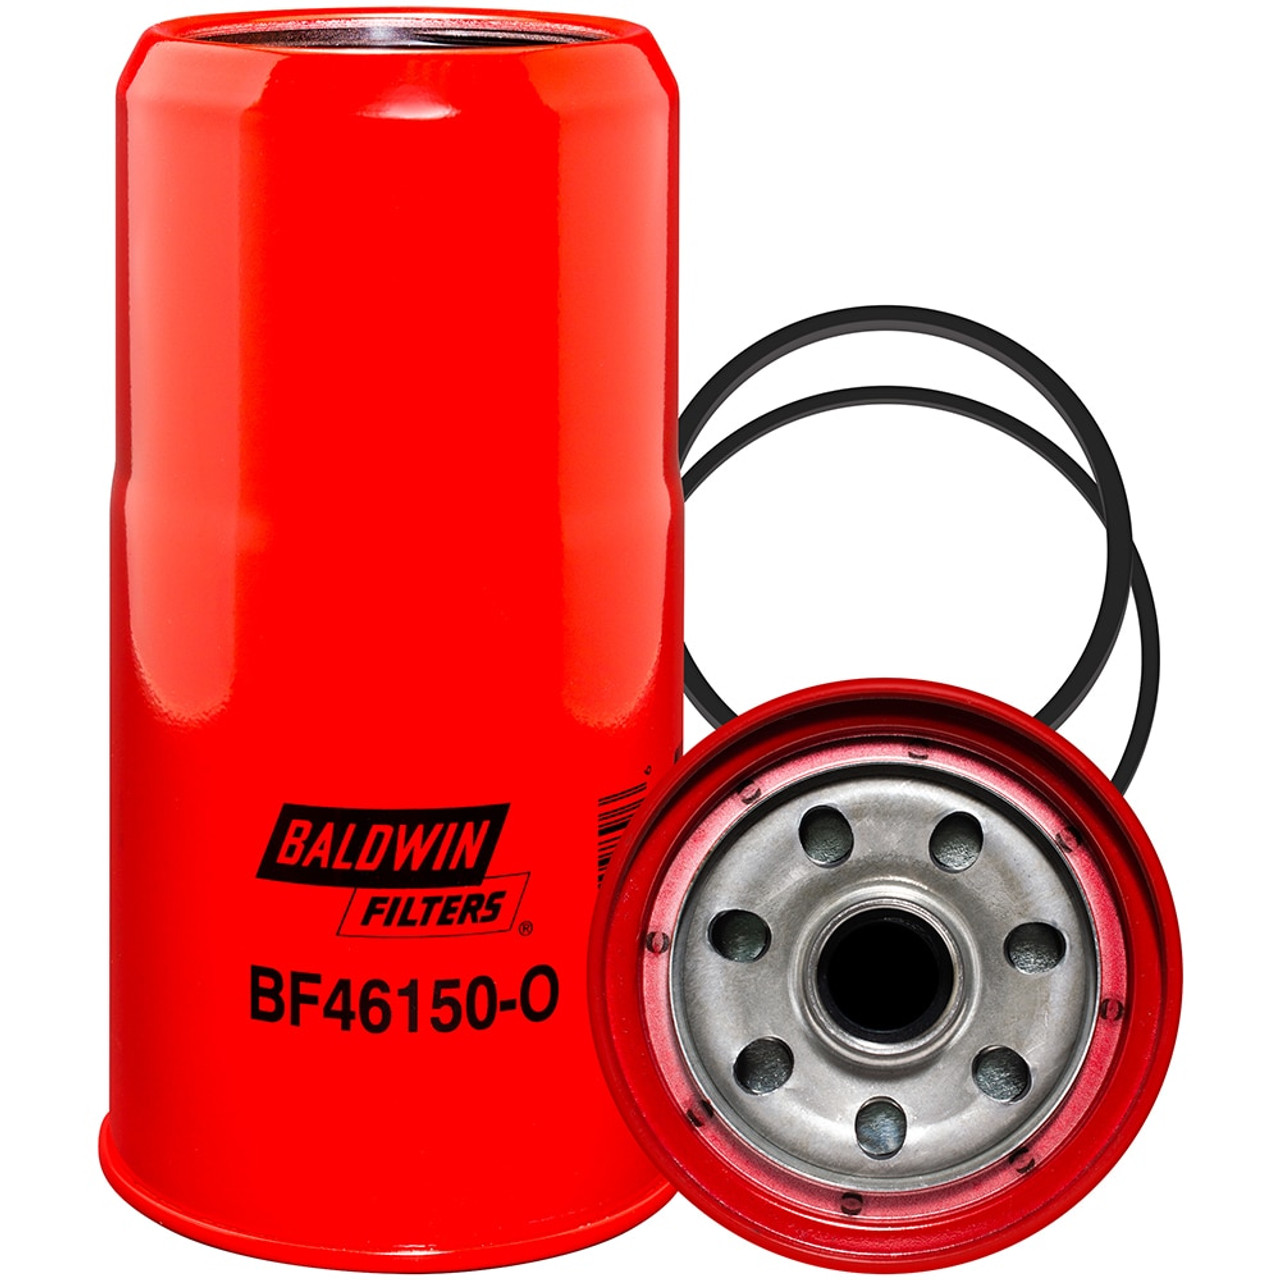 Baldwin Bf46150-O - Fuel/Water Separator Spin-On With Open Port For Bowl